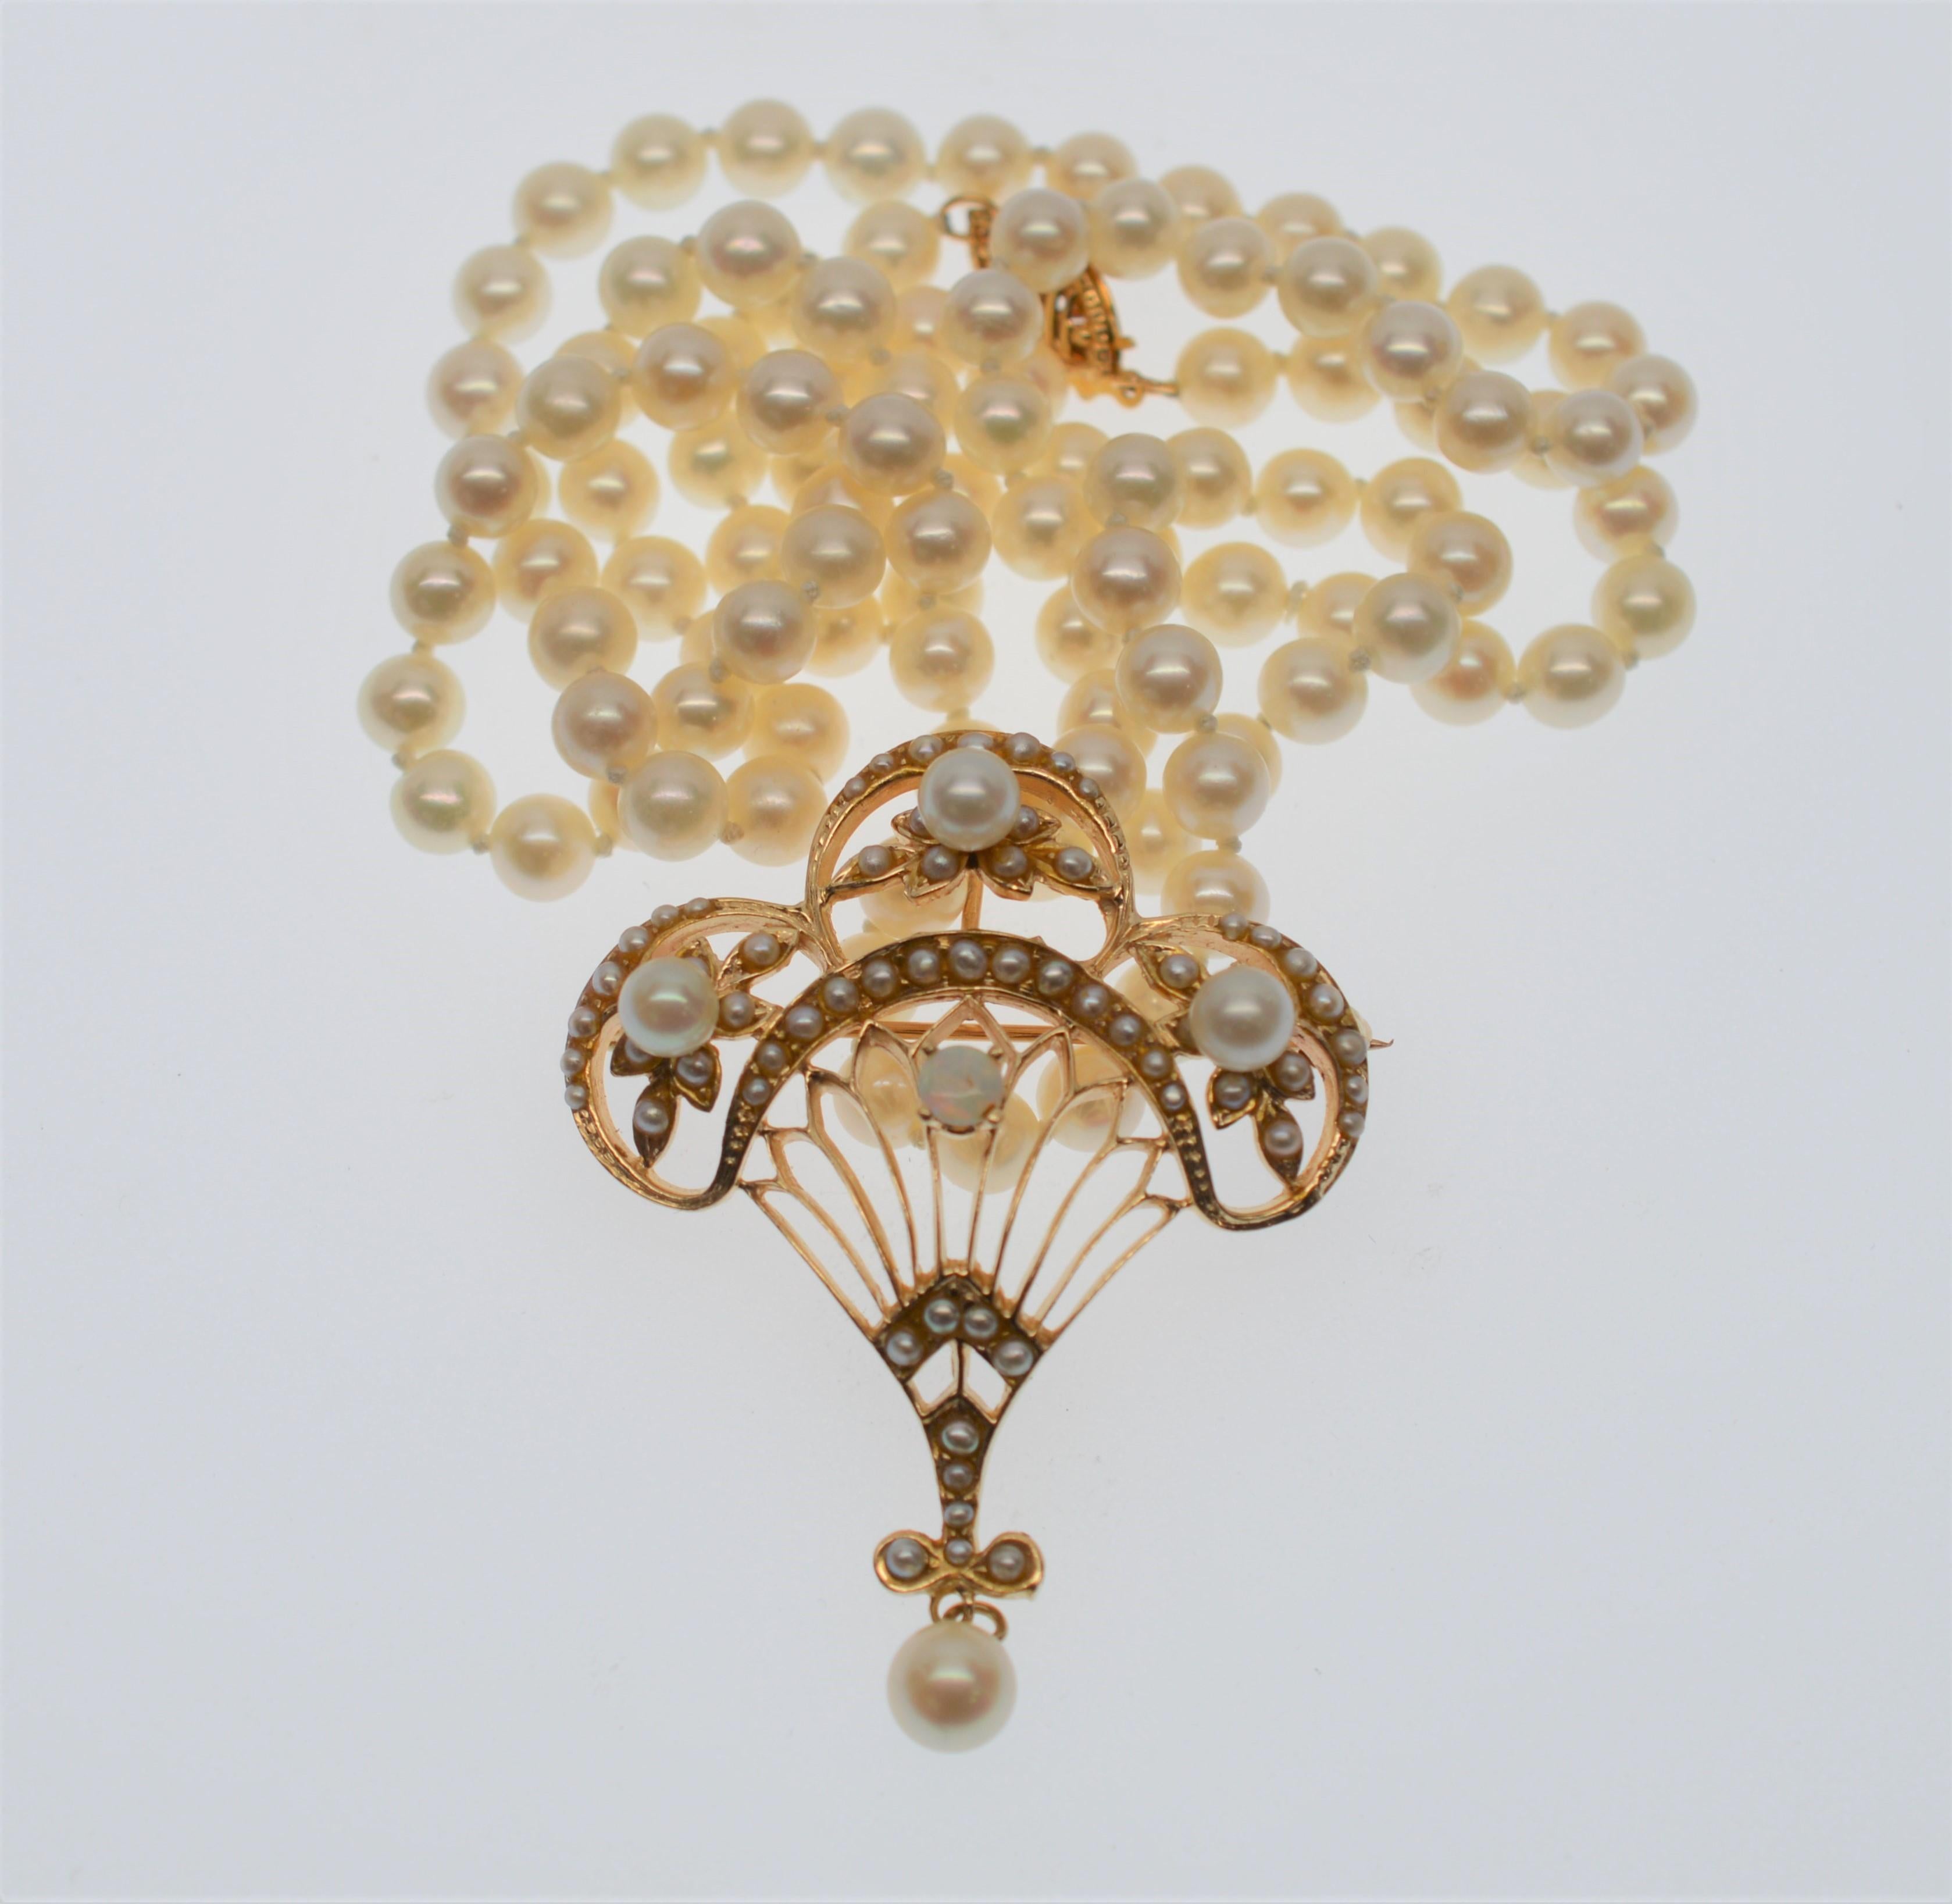 Women's Pearl Necklace with Fancy Antique Style 14K Gold, Opal & Pearl Pendant Brooch 